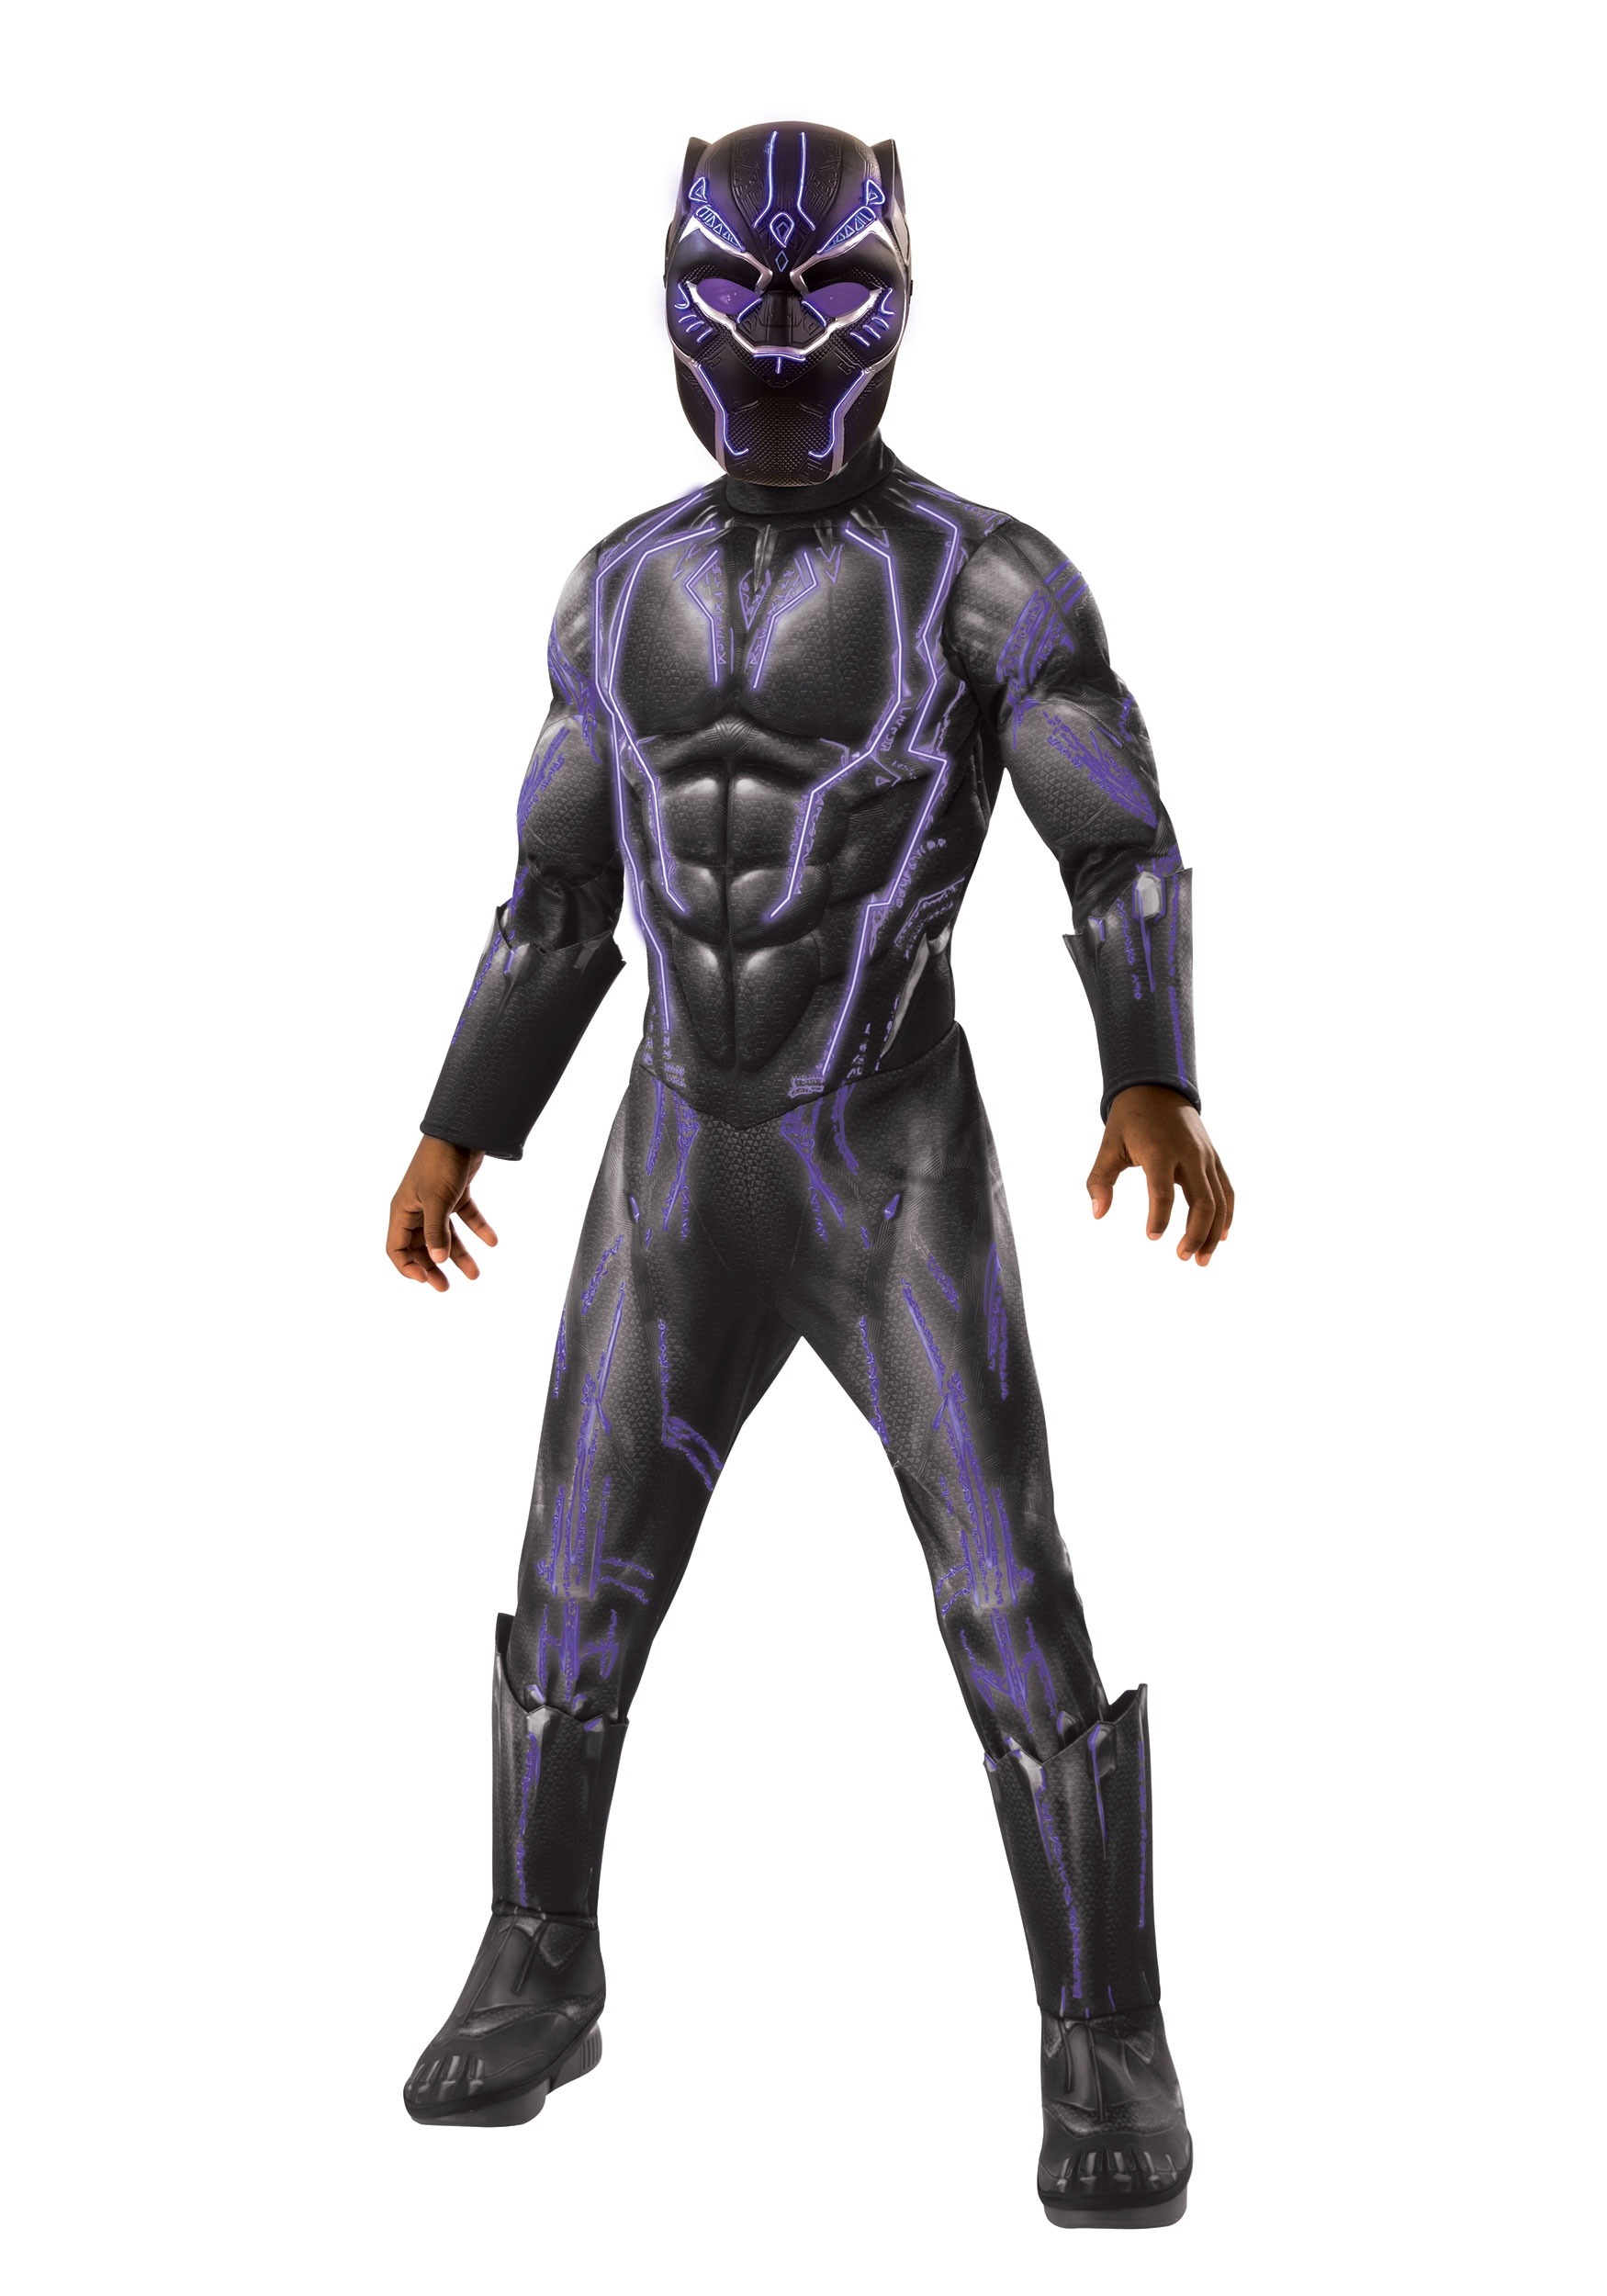 Light Up Black Panther Costume for a Child